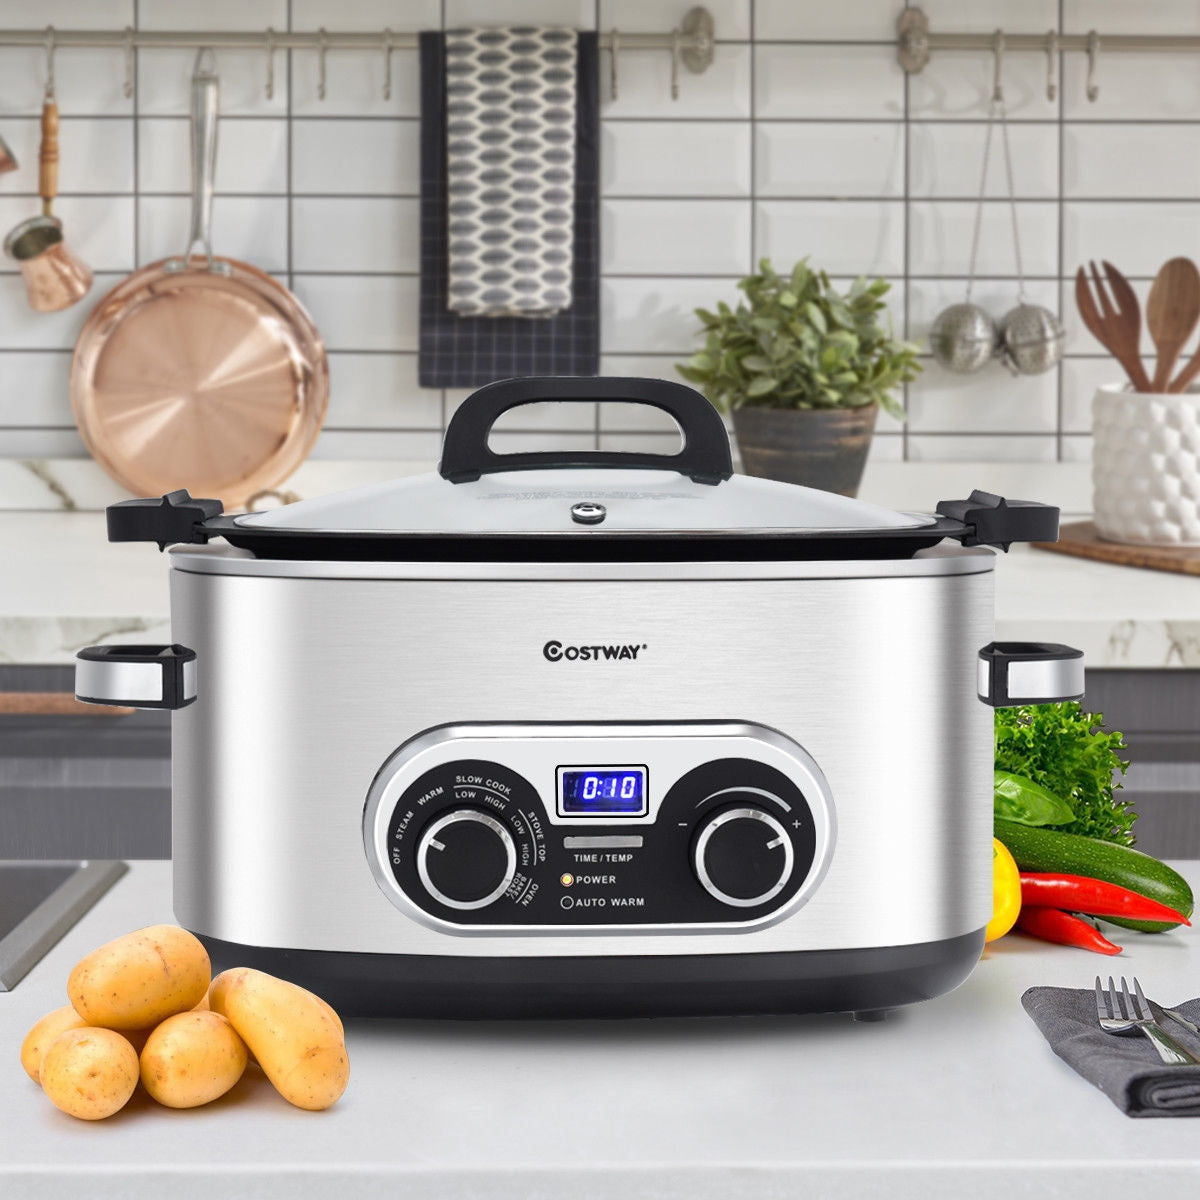 Multi function Slow Cooker Stainless-Steel Nonstick 4-in-1 with 6 Quart Capacity